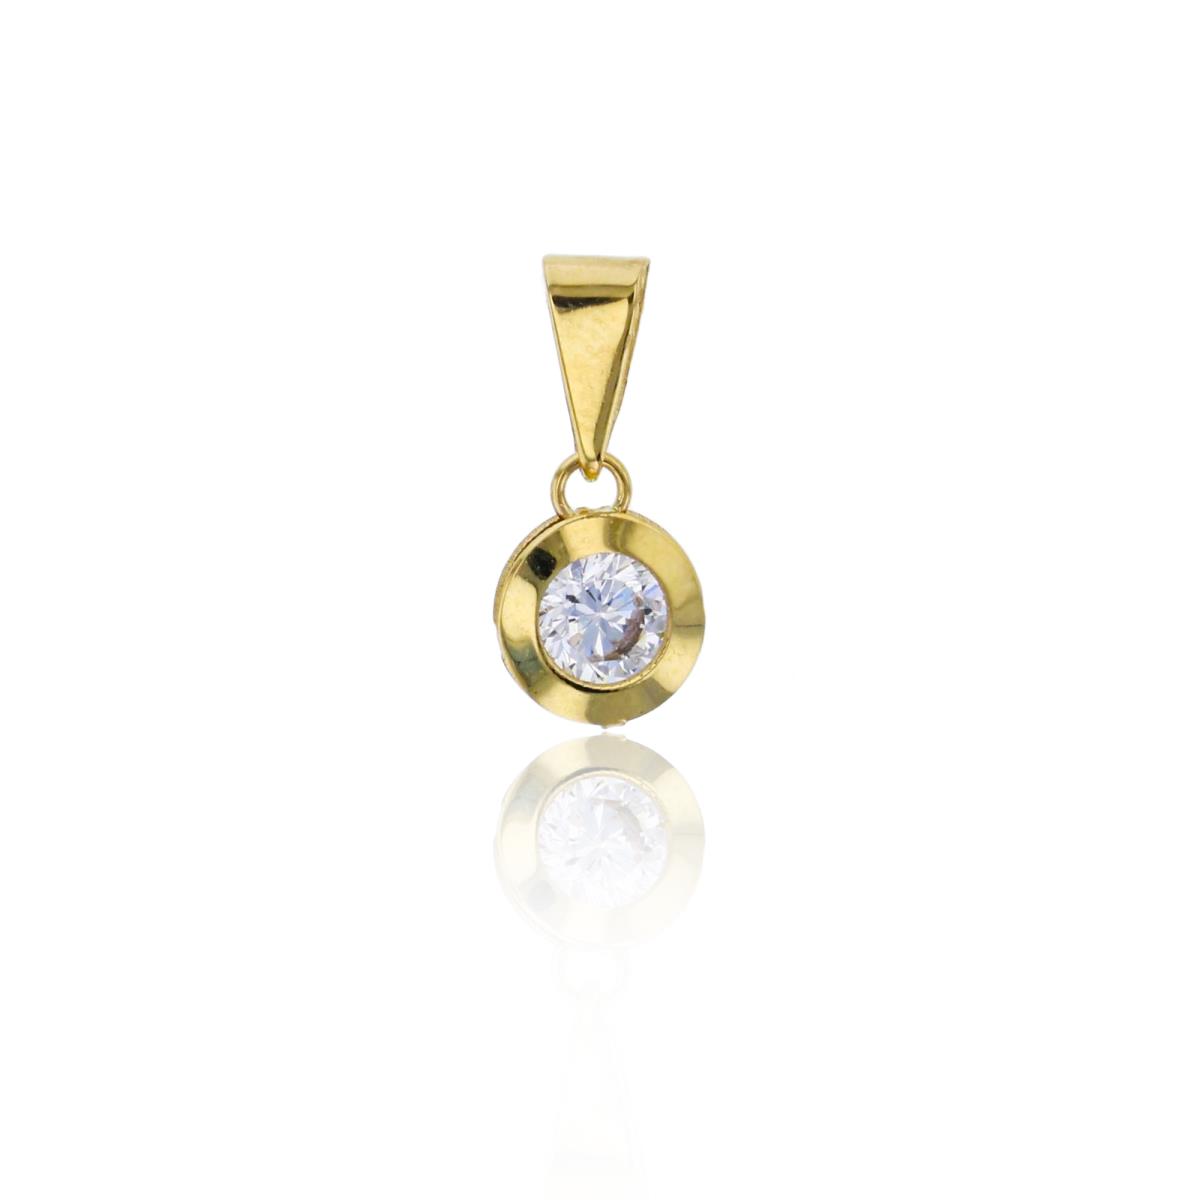 10K Yellow Gold Rd Cut Solitaire 13x6mm Polished Circle Dangling Pendant